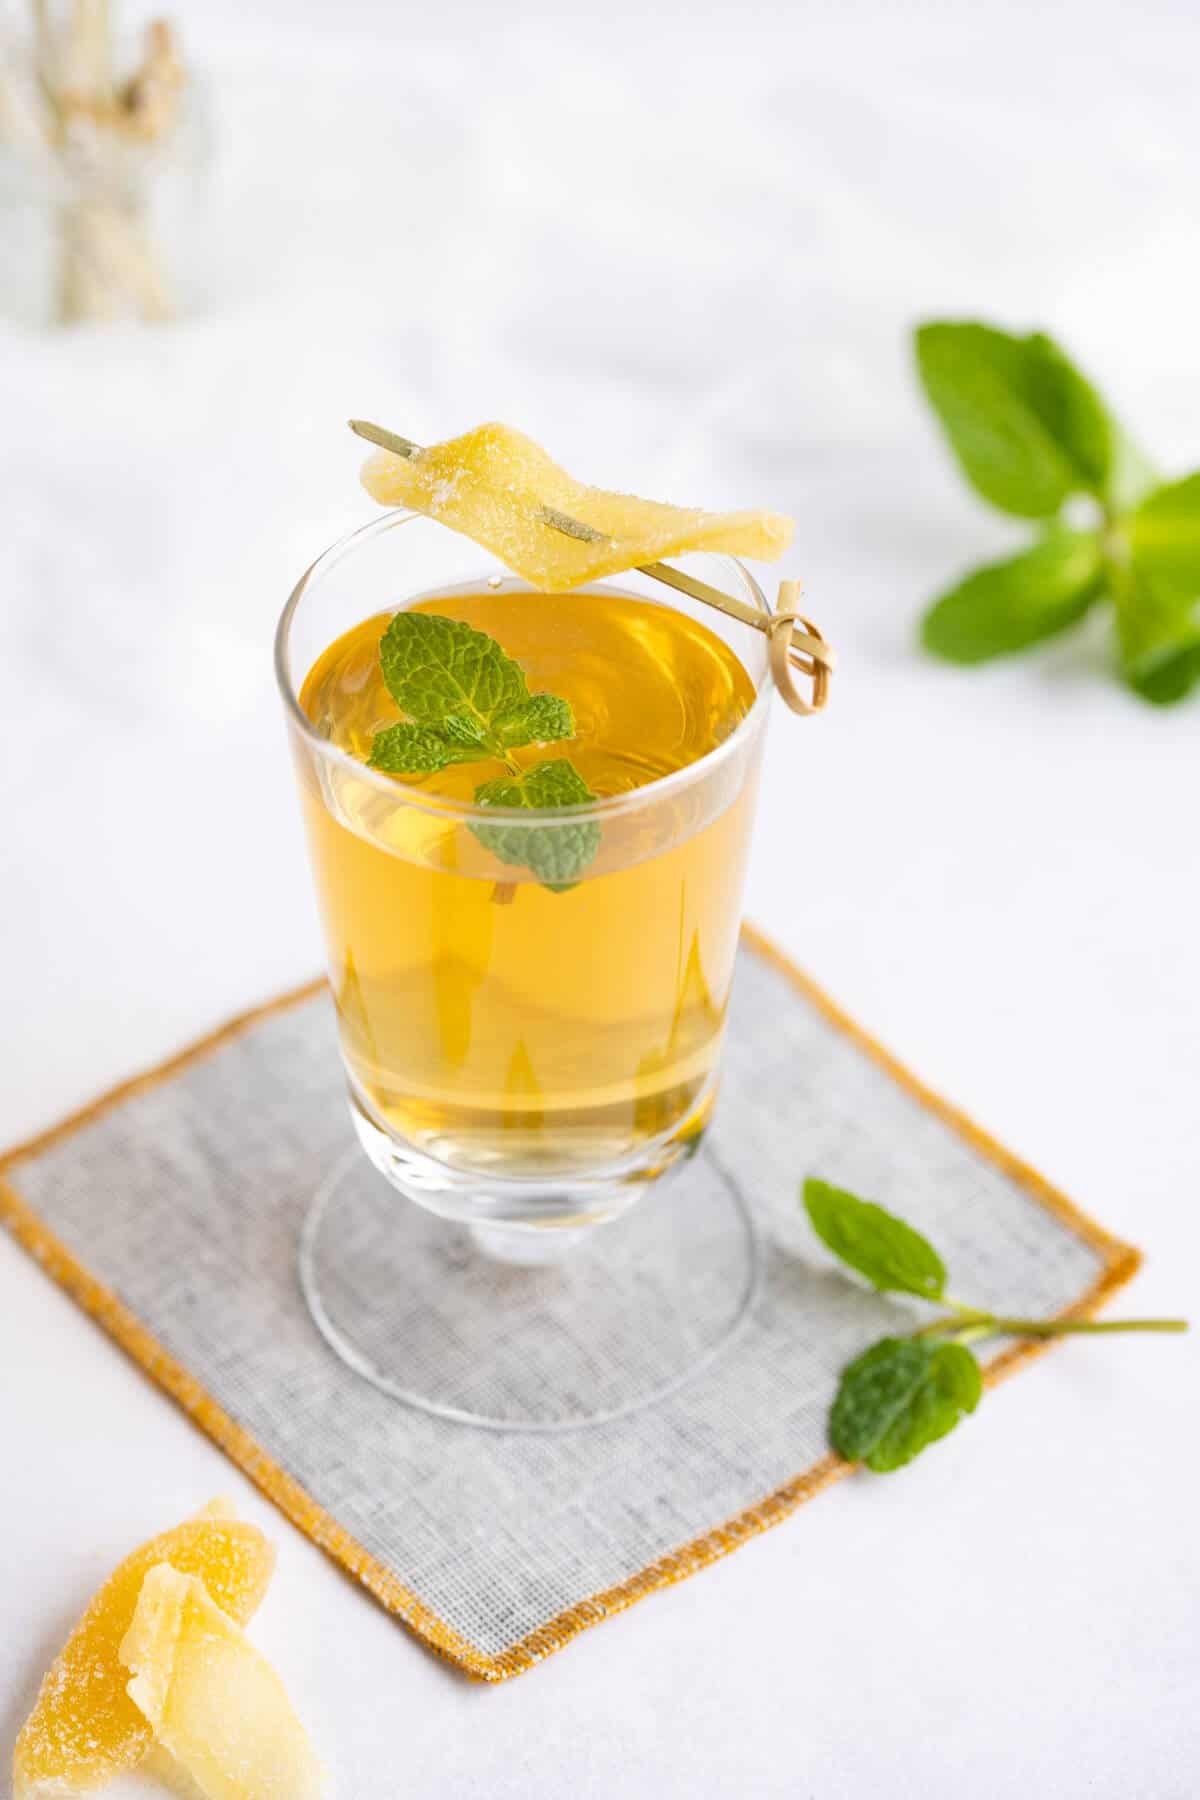 Glass of ginger kombucha garnished with a mint leaf and crystallized ginger on a cocktail pick.